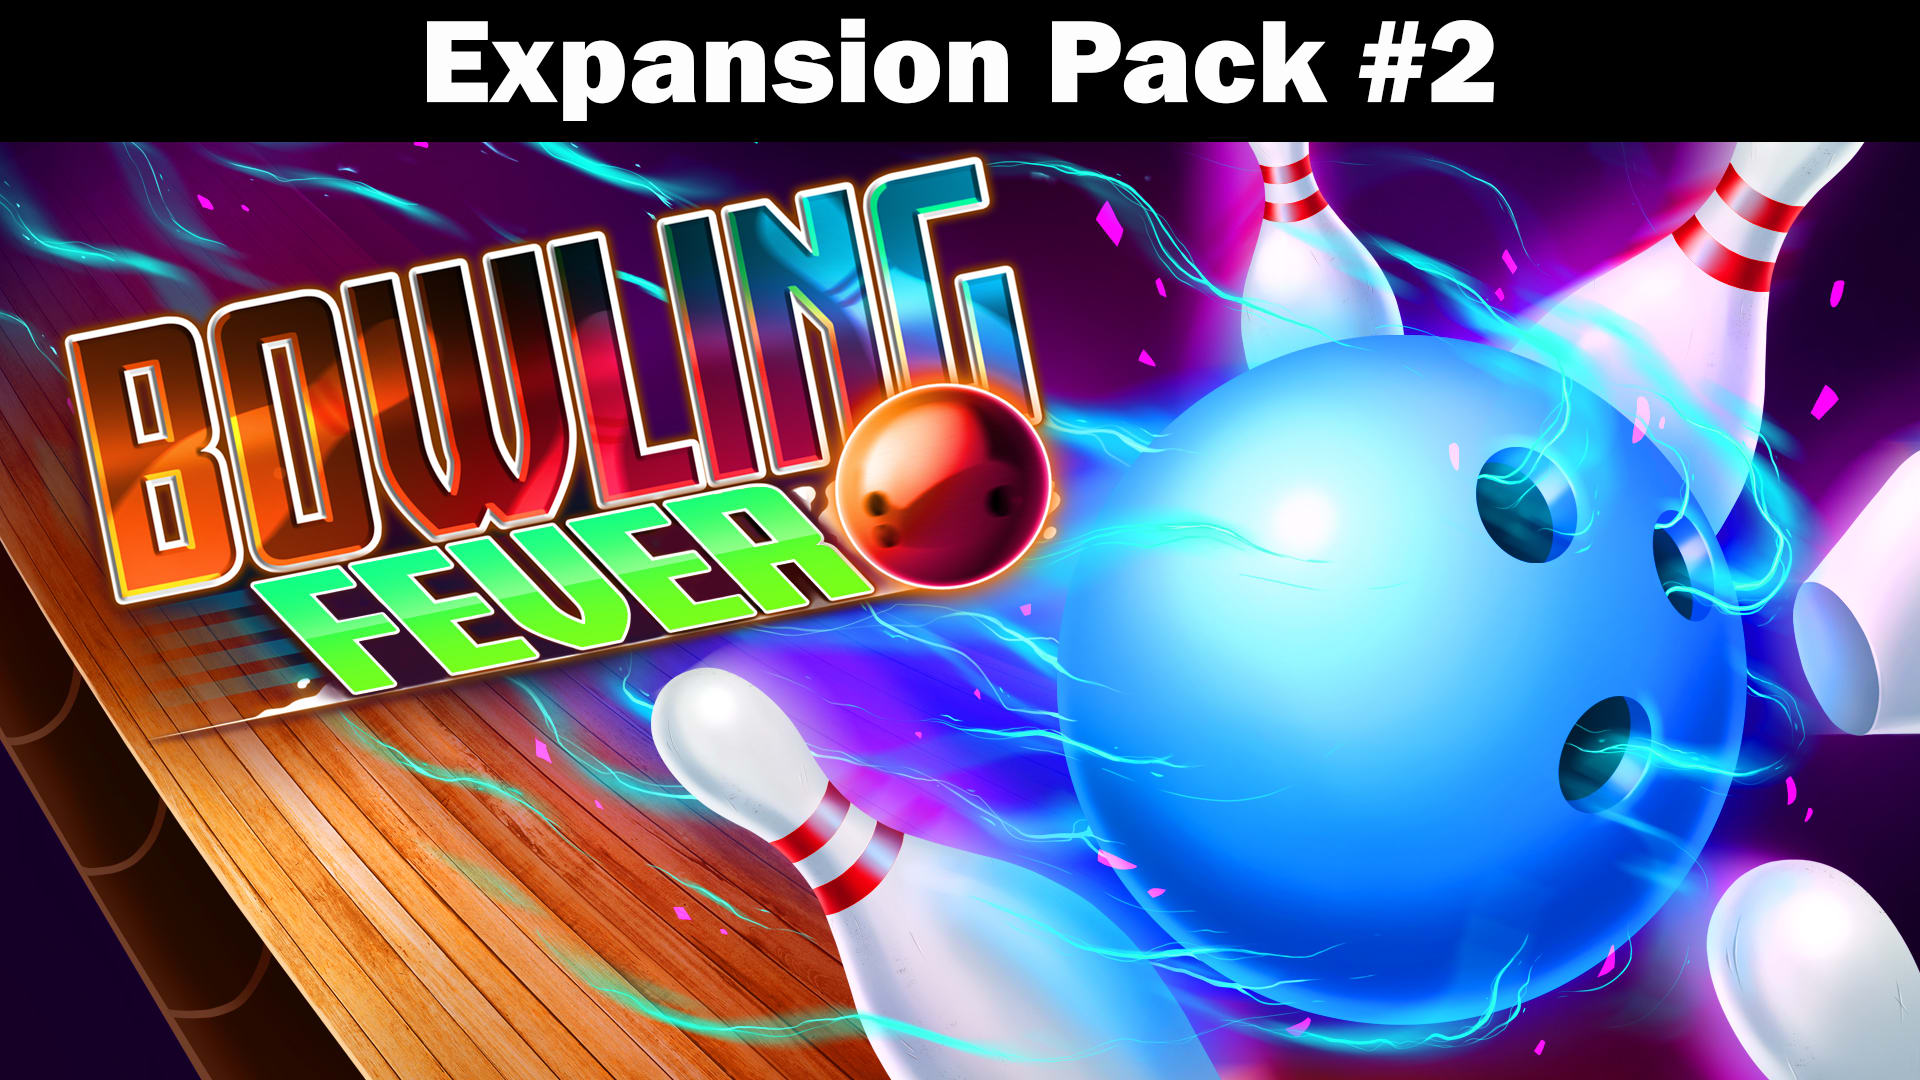 Bowling Fever Expansion Pack #2